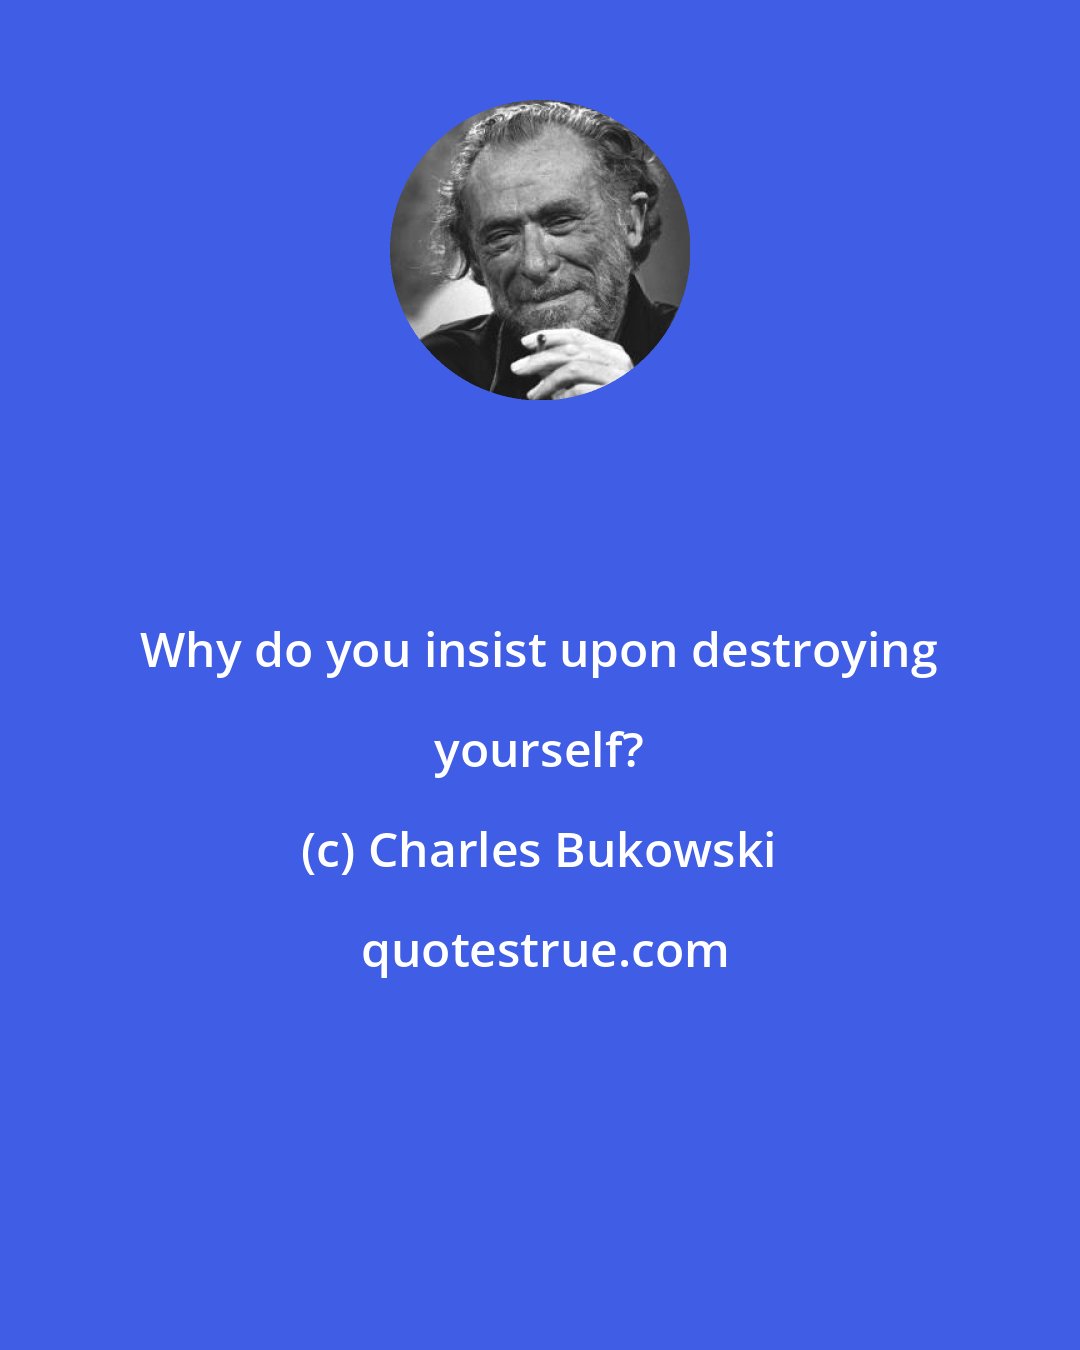 Charles Bukowski: Why do you insist upon destroying yourself?